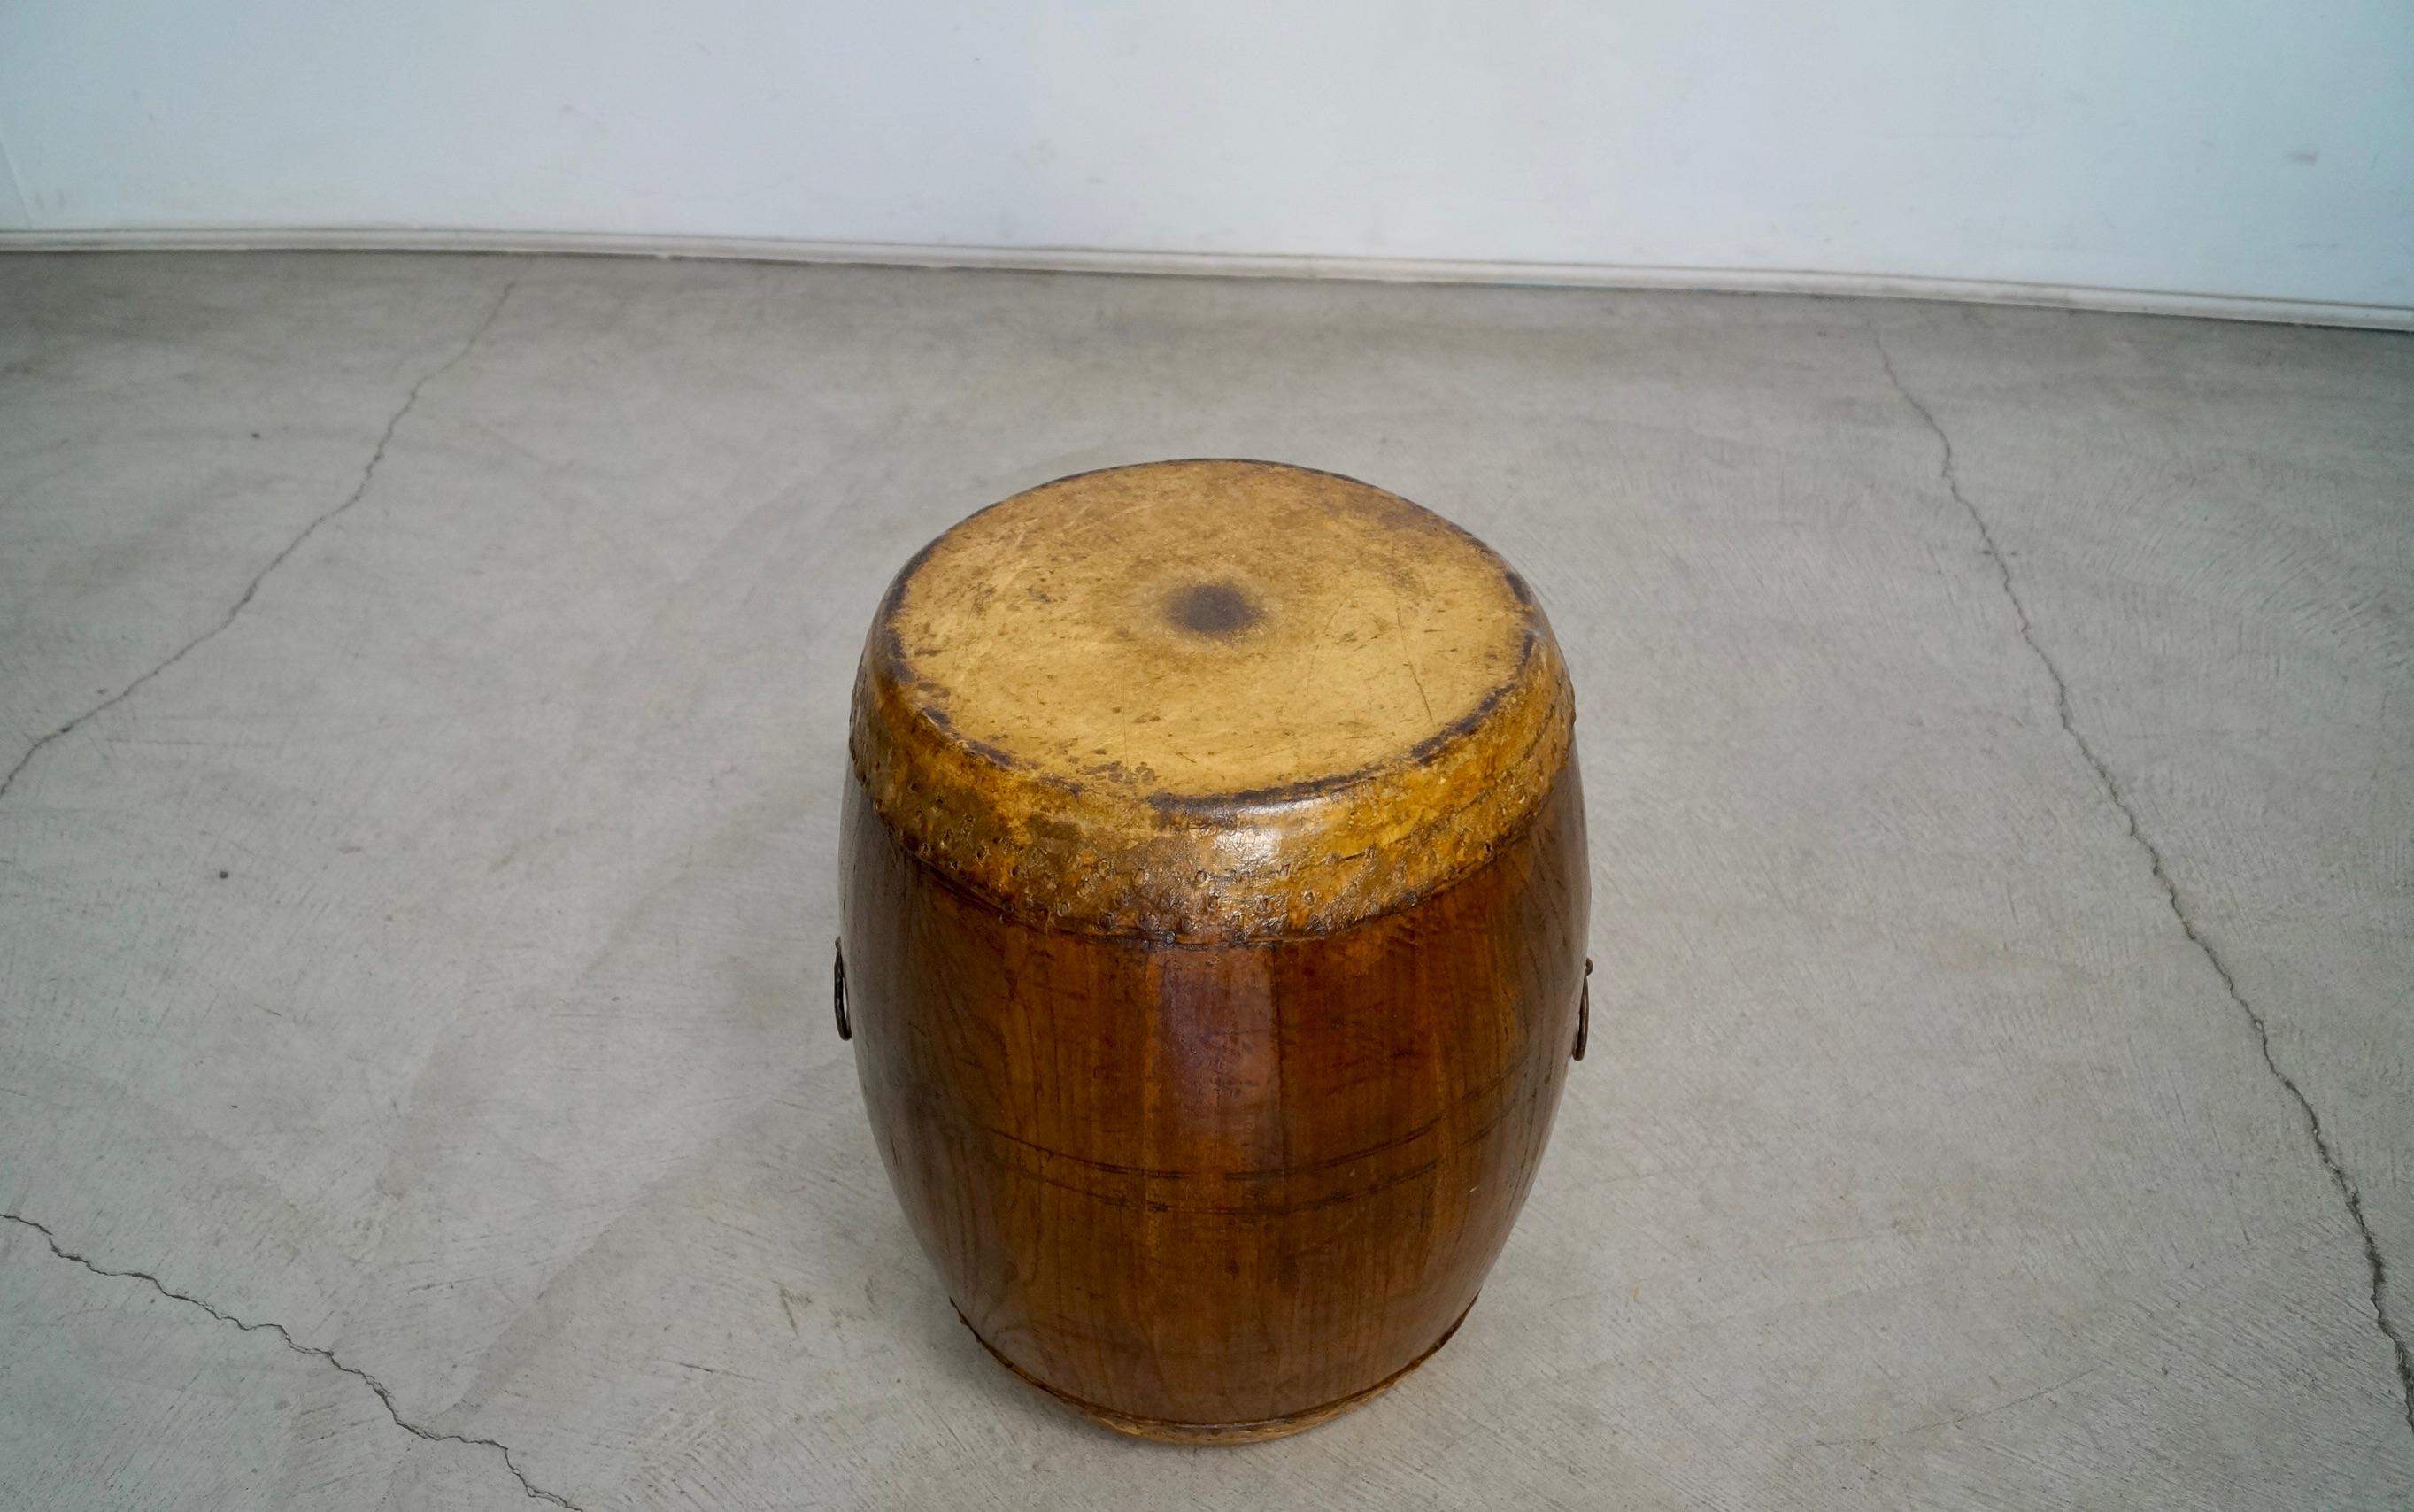 Beautiful antique drum for sale. From Asia, and well cared for. Has leather tops on both end, and still has the original rings on both ends. It's made of solid oak with a walnut finish. Shows beautiful patina throughout. Can be used as a side table,